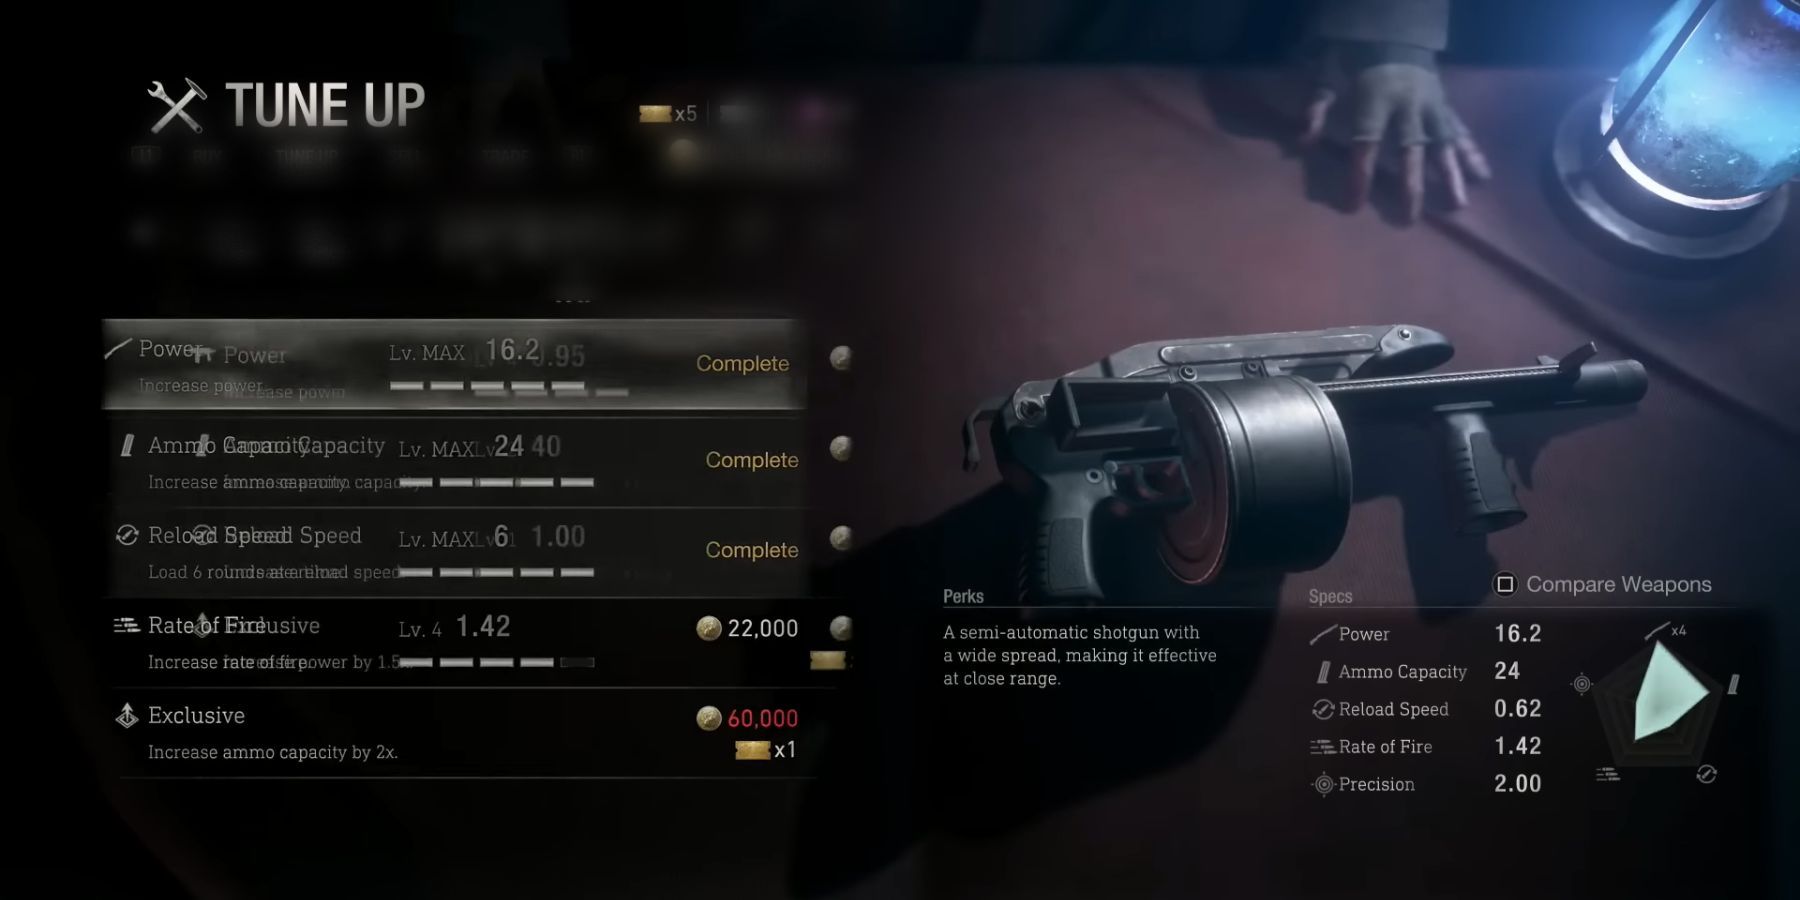 Punisher Location, Weapons Stats, and Upgrades